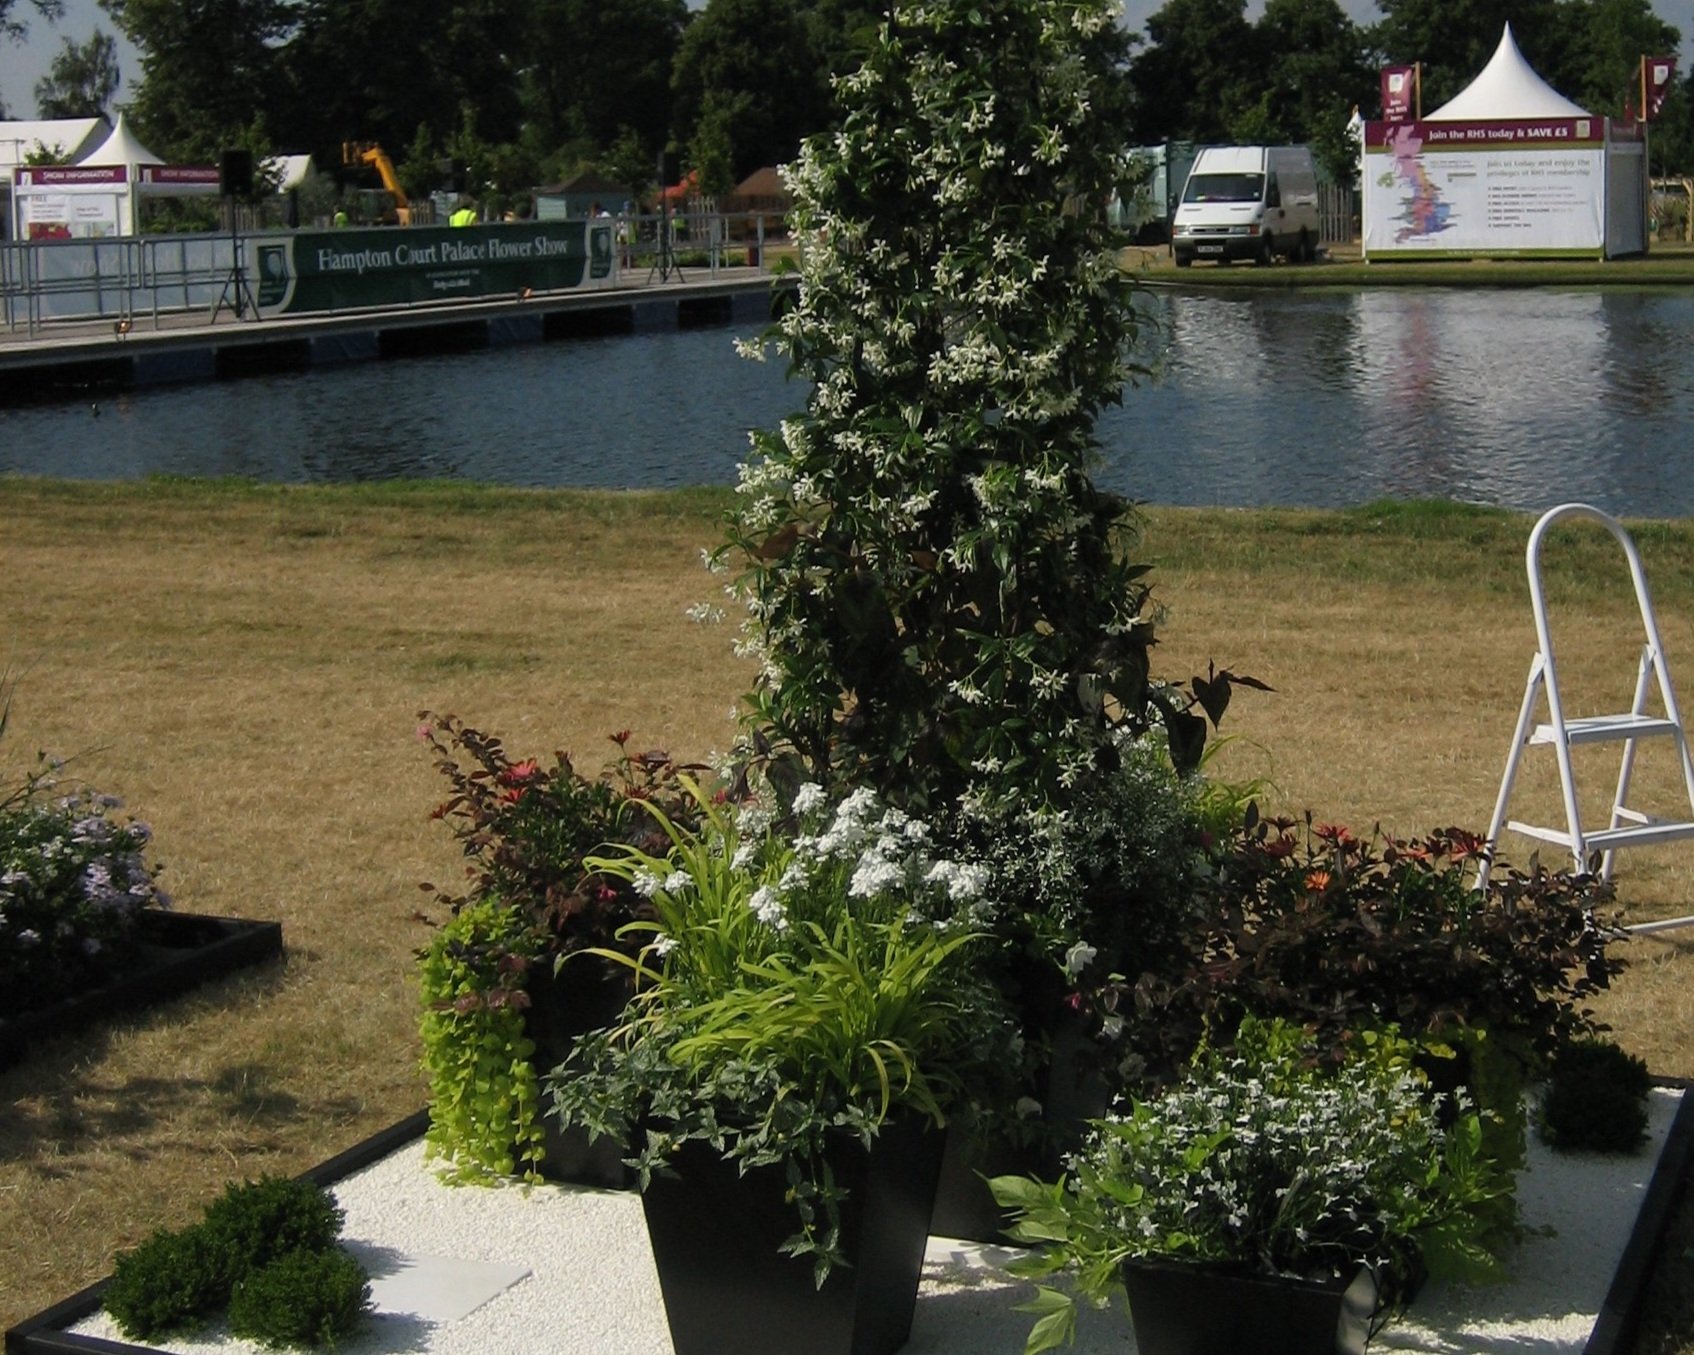 Our entry in Hampton Court 2006